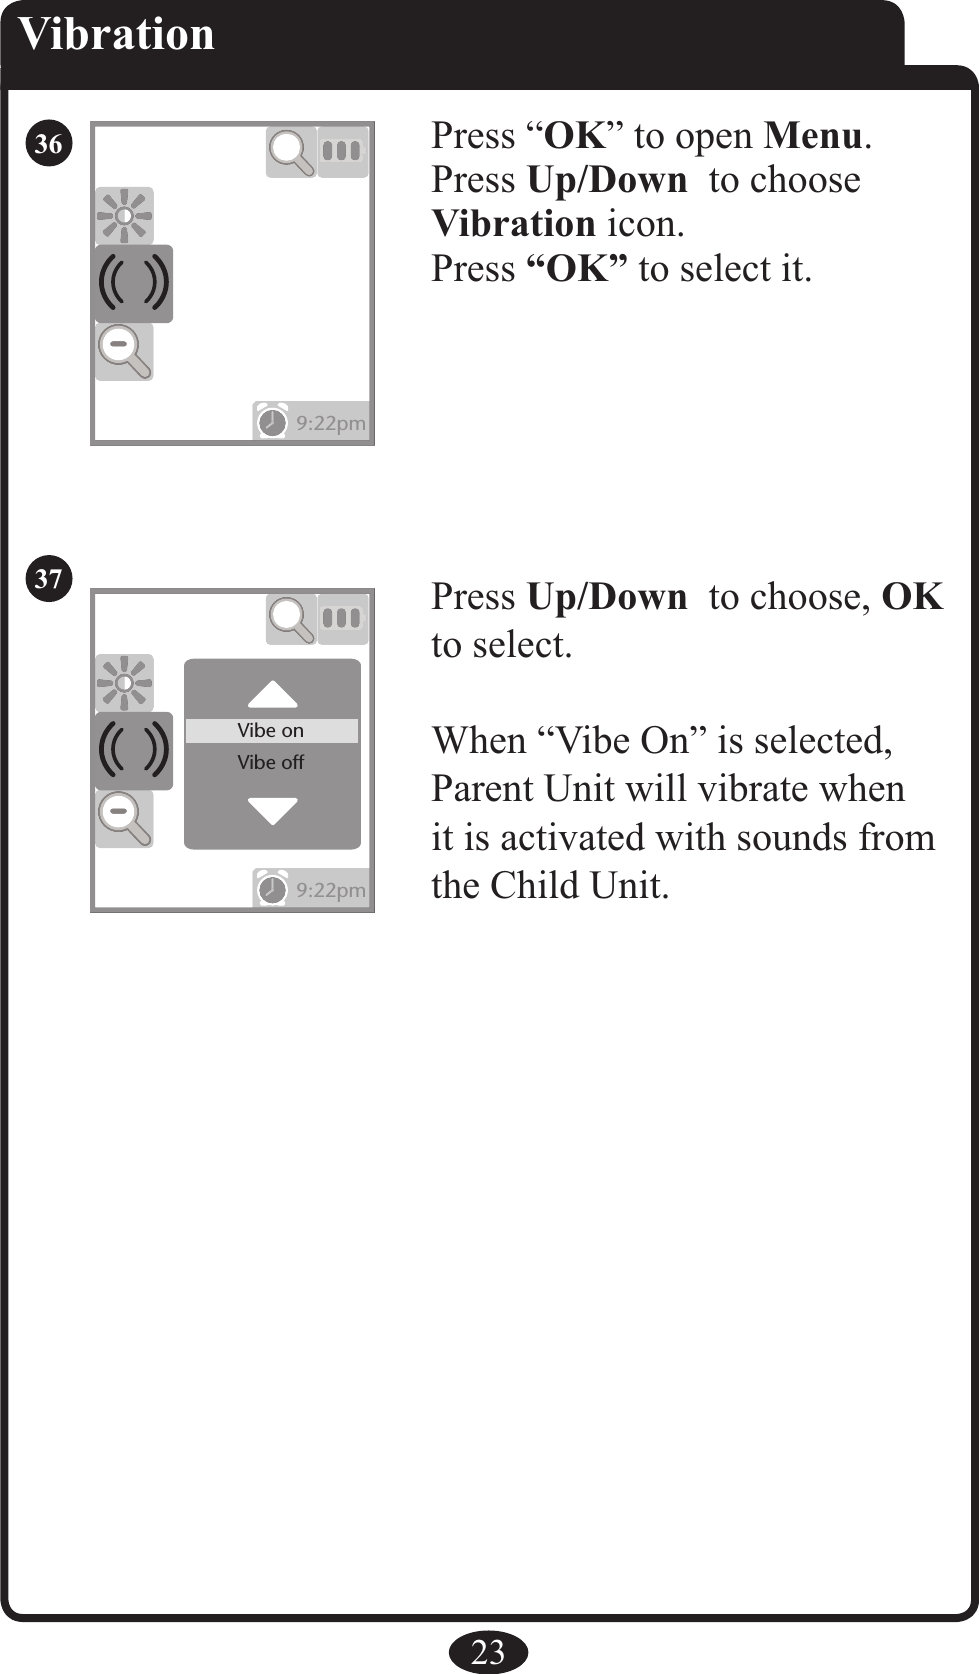 23VibrationPress Up/Down  to choose, OK to select.When “Vibe On” is selected, Parent Unit will vibrate when it is activated with sounds from the Child Unit. Press “OK” to open Menu.Press Up/Down  to chooseVibration icon. Press “OK” to select it.9:22pm9:22pm9:22pm9:22pmVibe onVibe off3637